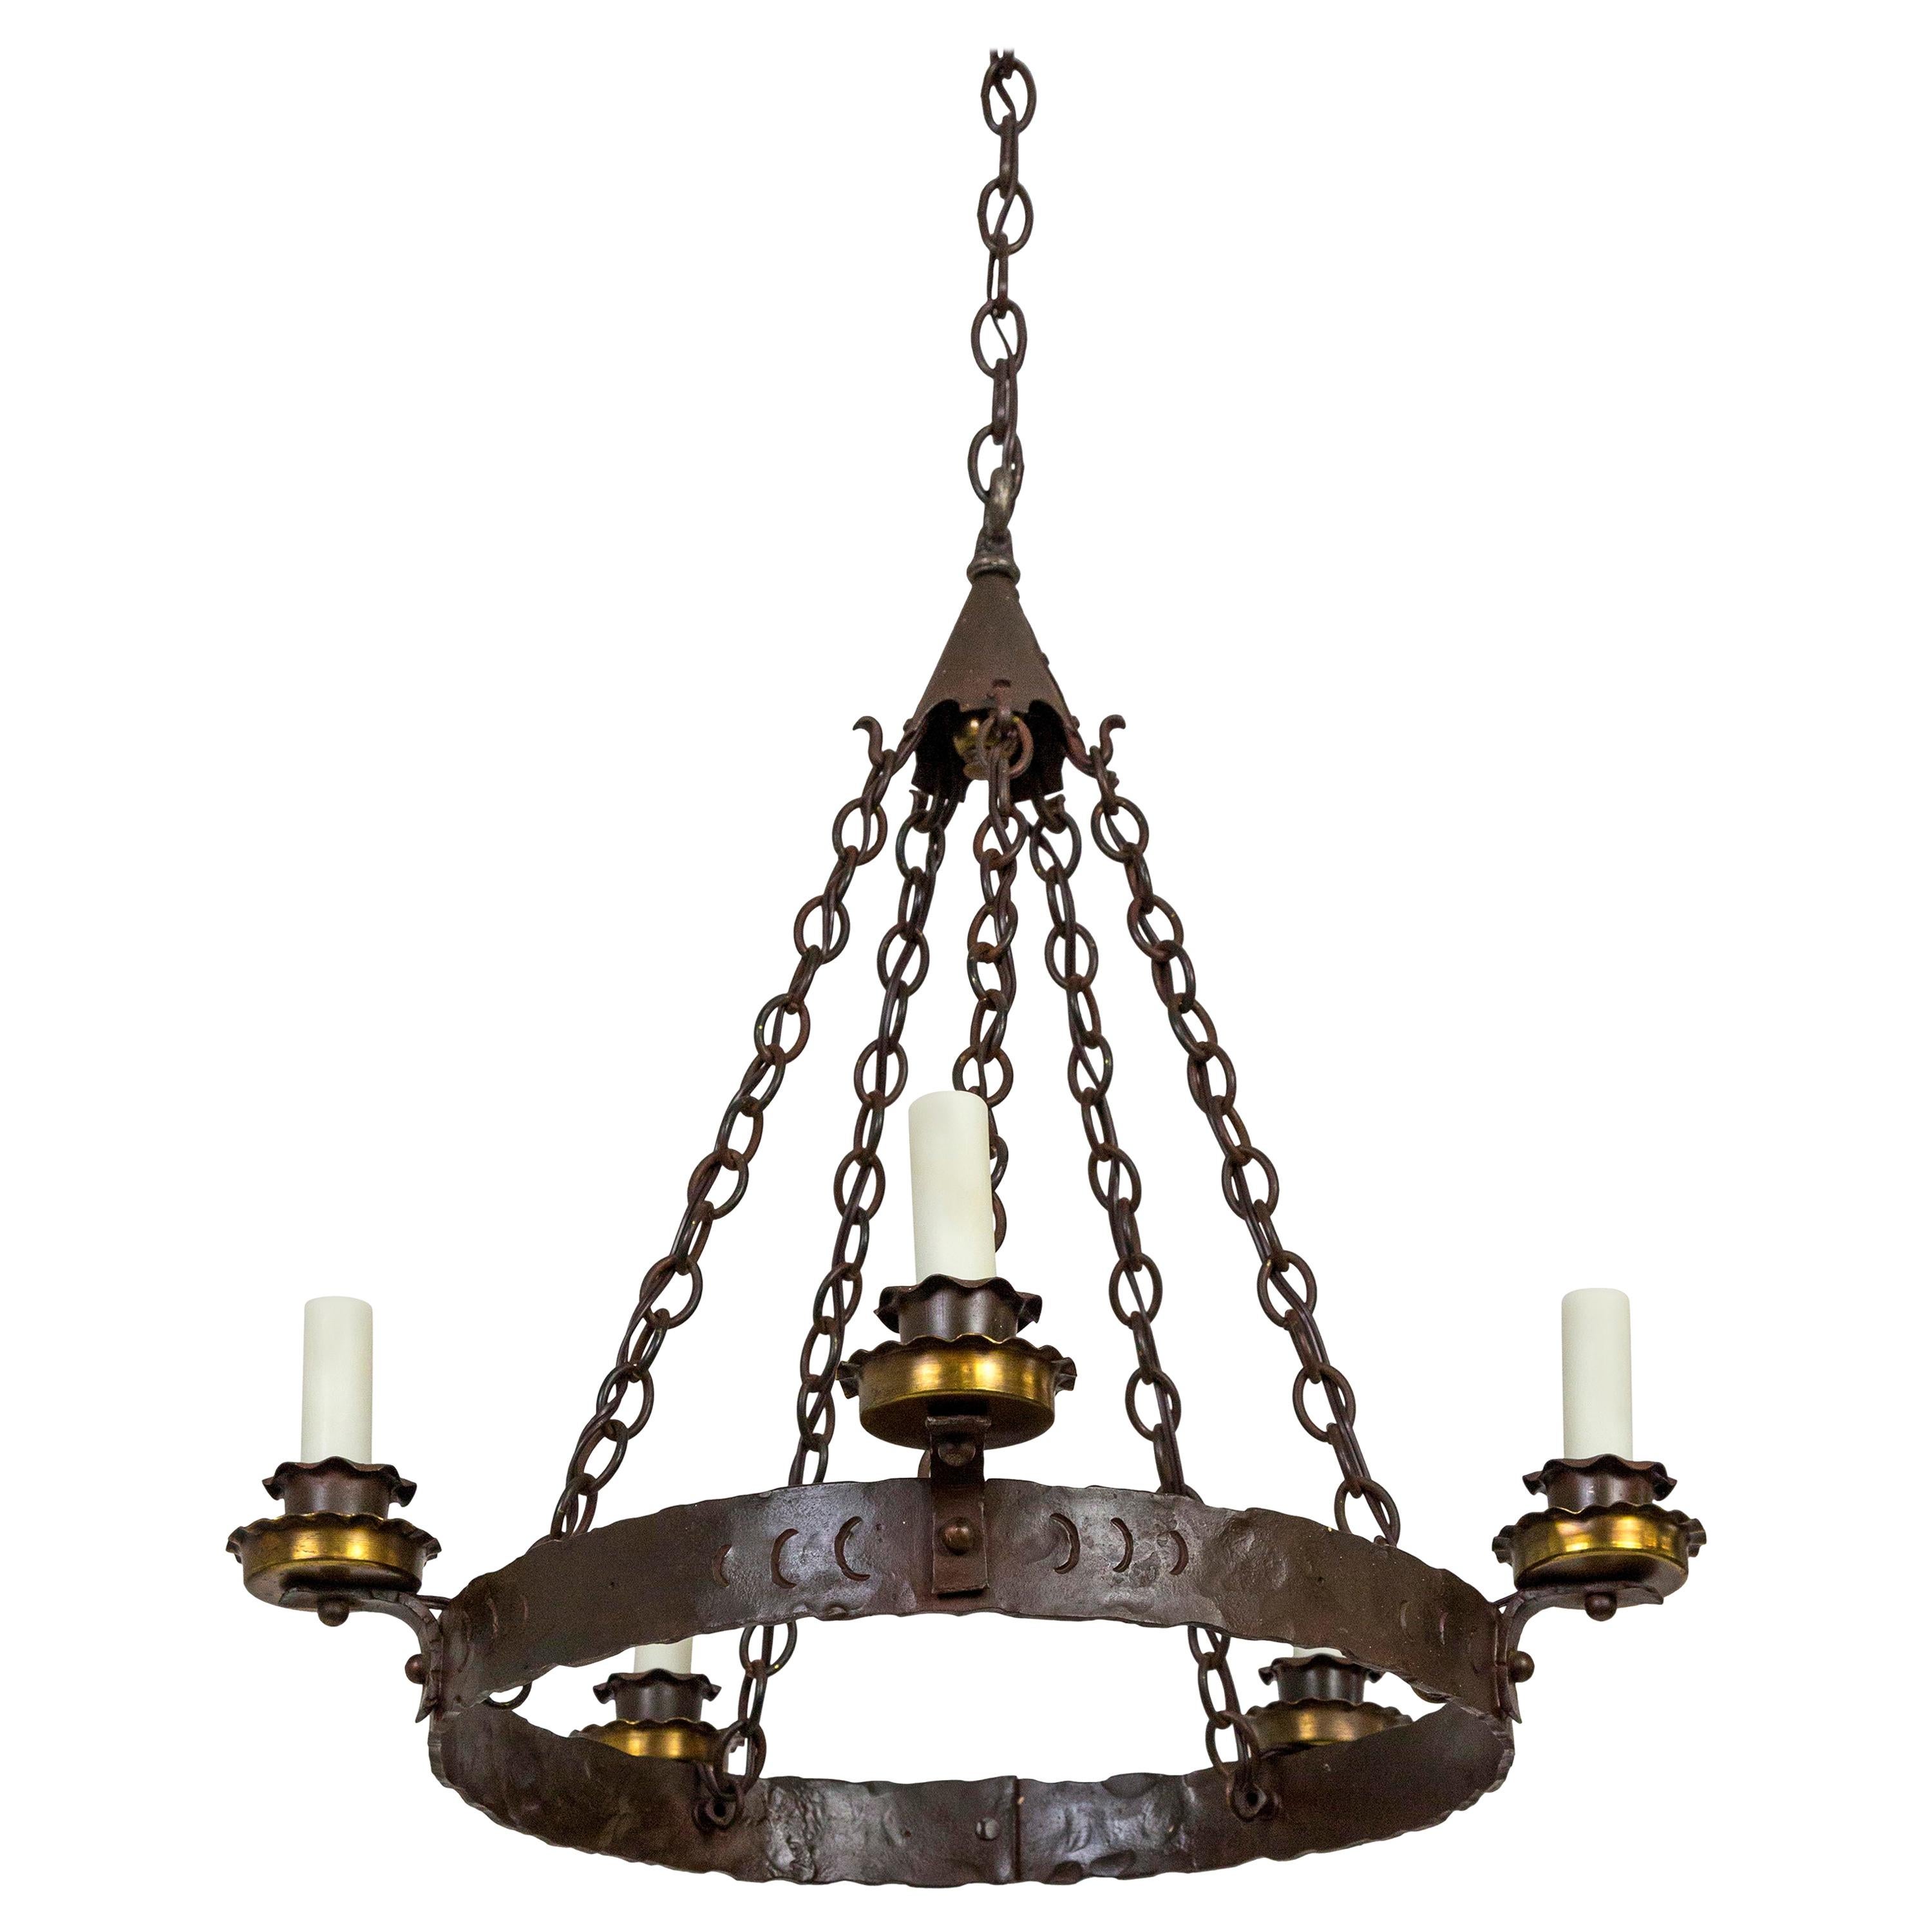 Rustic Medieval Style Wrought Iron Chandelier